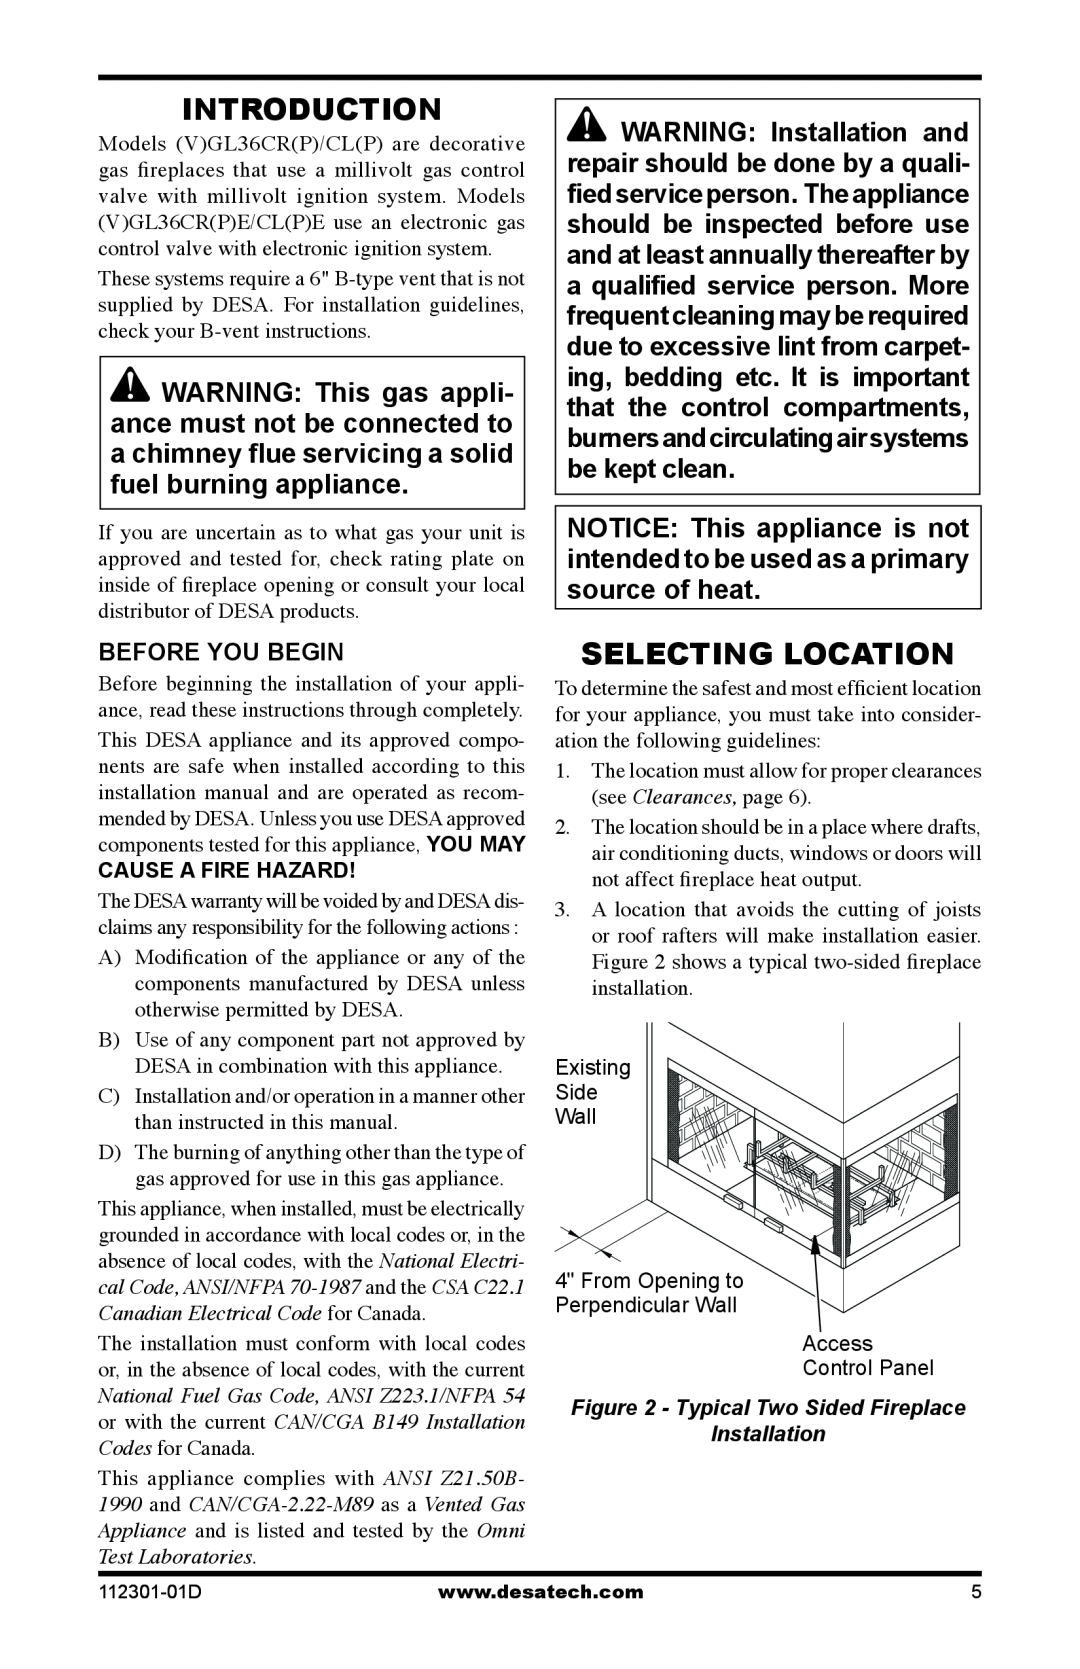 Desa GL36CRP, GL36CLP installation manual Introduction, Selecting Location, Before You Begin 